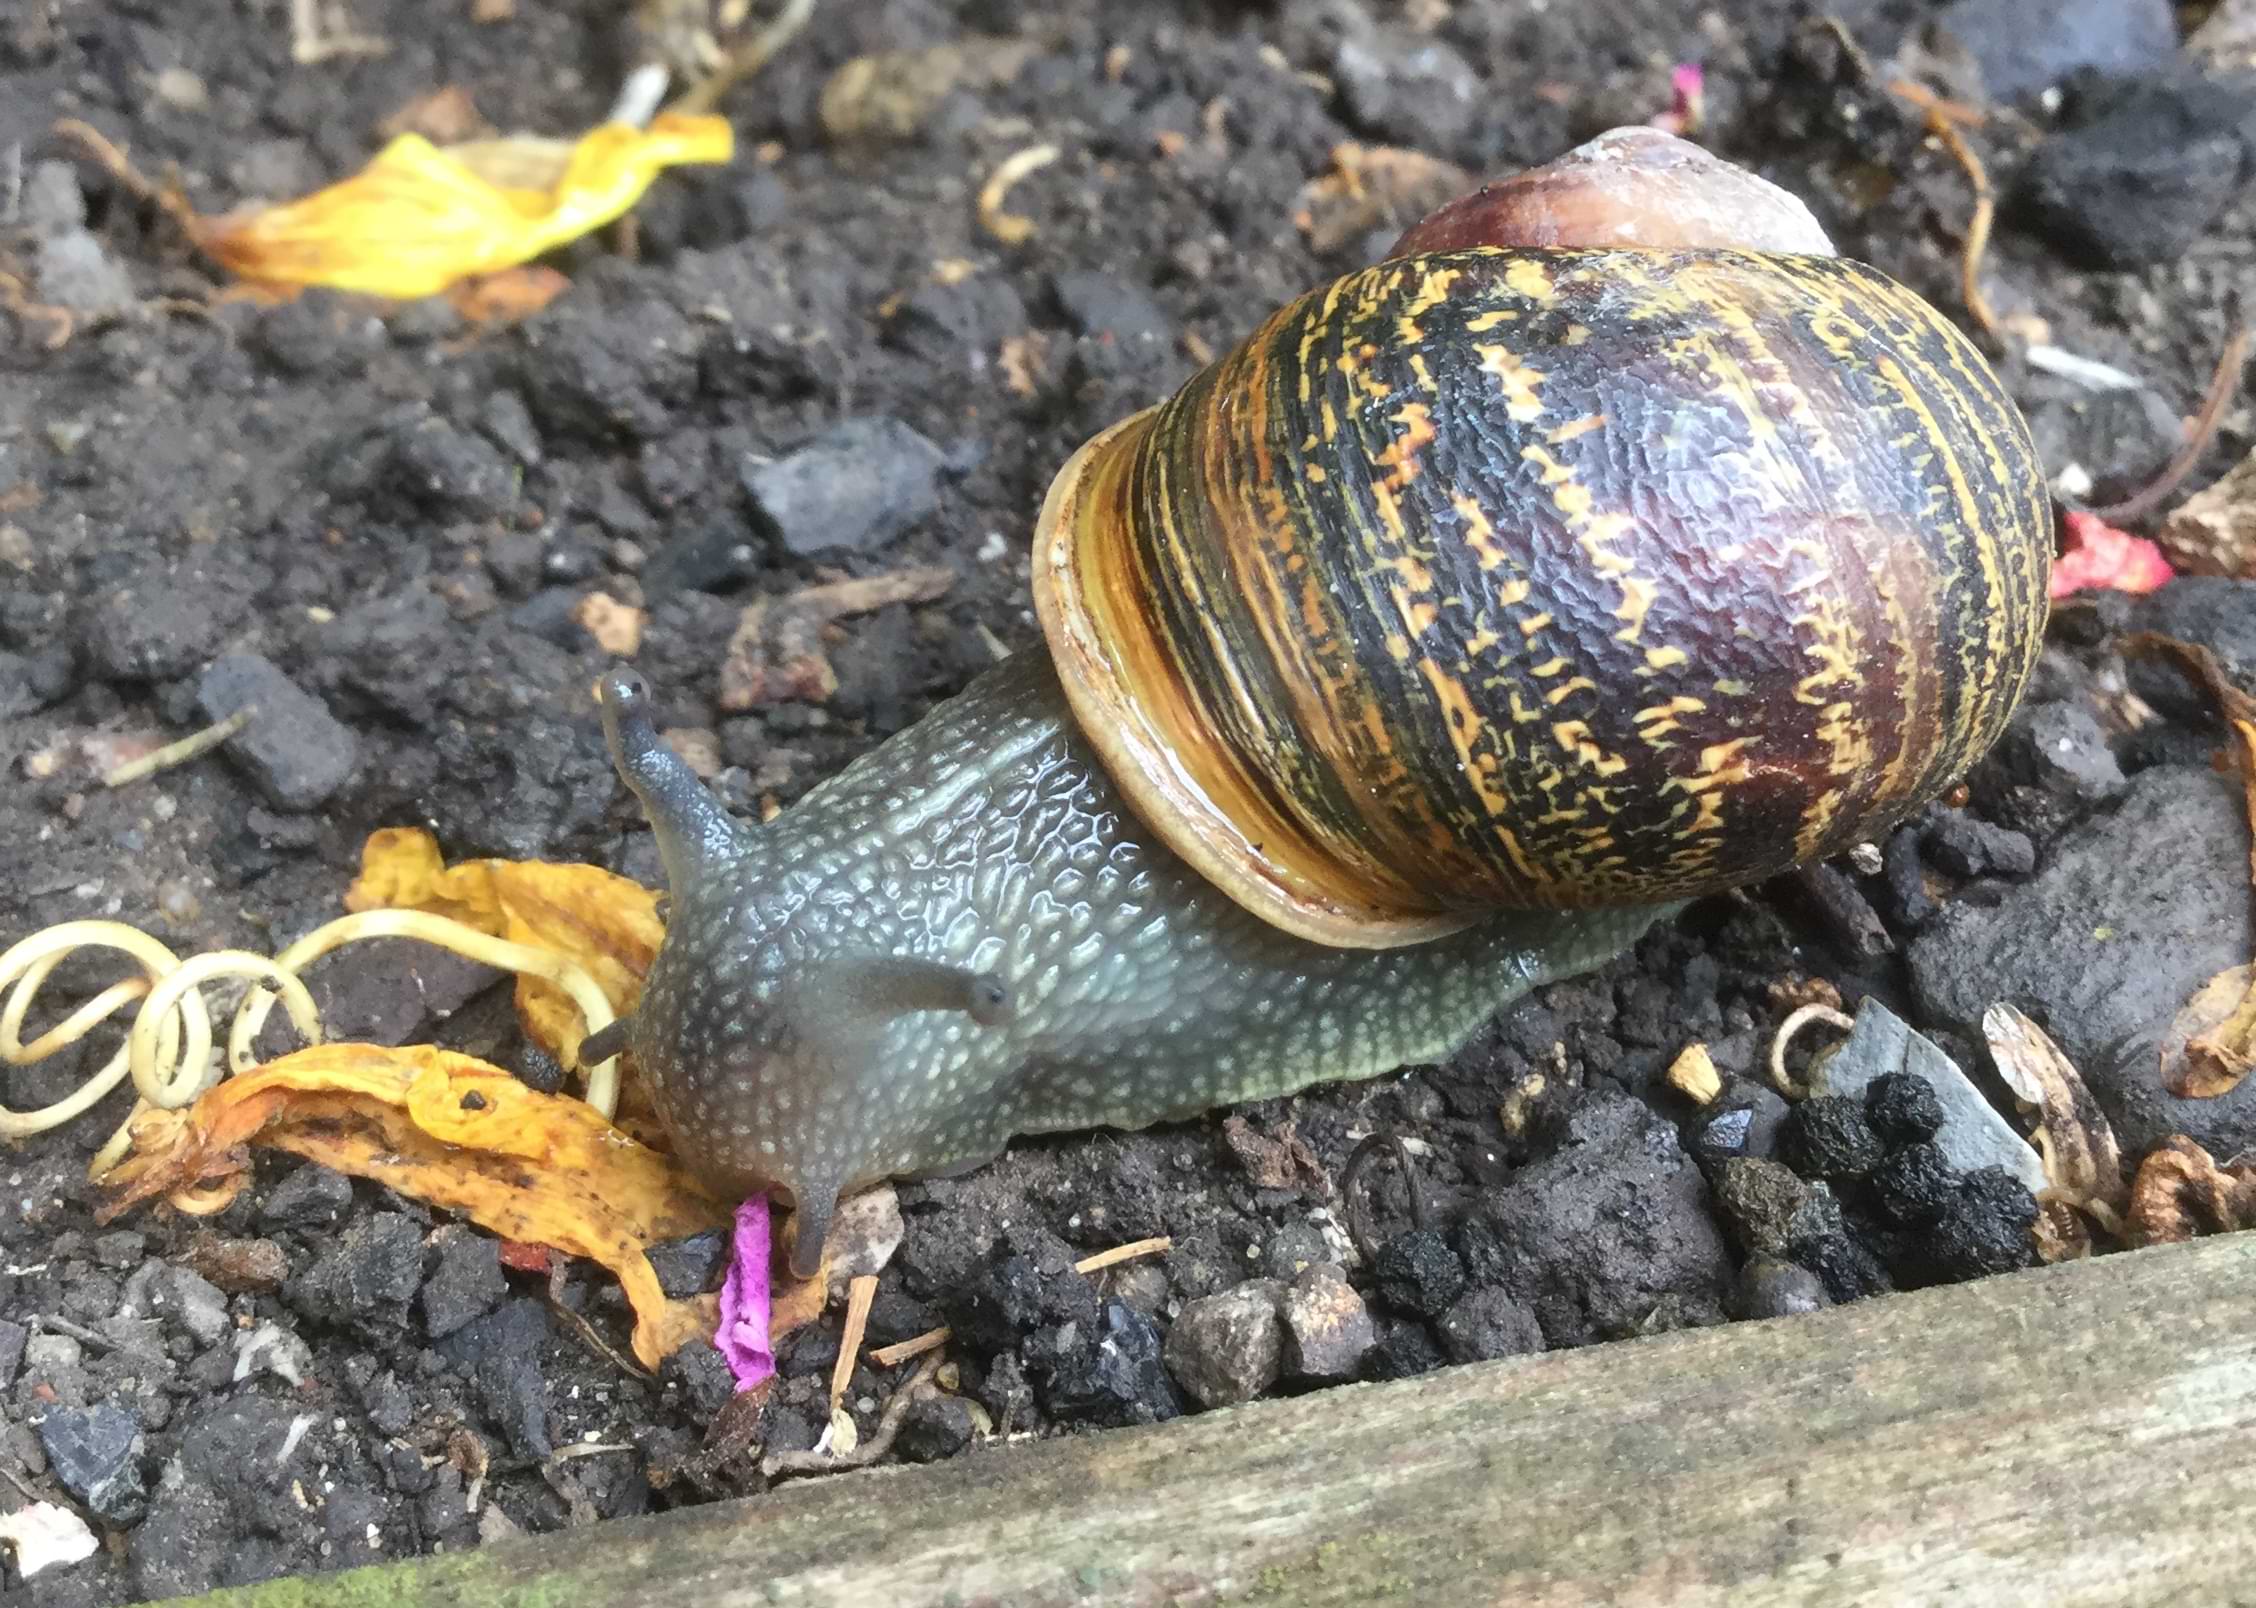 Photo of common garden snail sitting on a few shrivelled up yellow flower petals and looking directly up at the camera. She has a dark grey body that is covered in small lumps and a whitish line running down her middle. The shell is a mixture of pale yellows and dark browns, curling in a striped pattern around the coil of her shell. The lip of her shell is rounded and light yellow in colour. One of her eyestalks is bent at an angle.